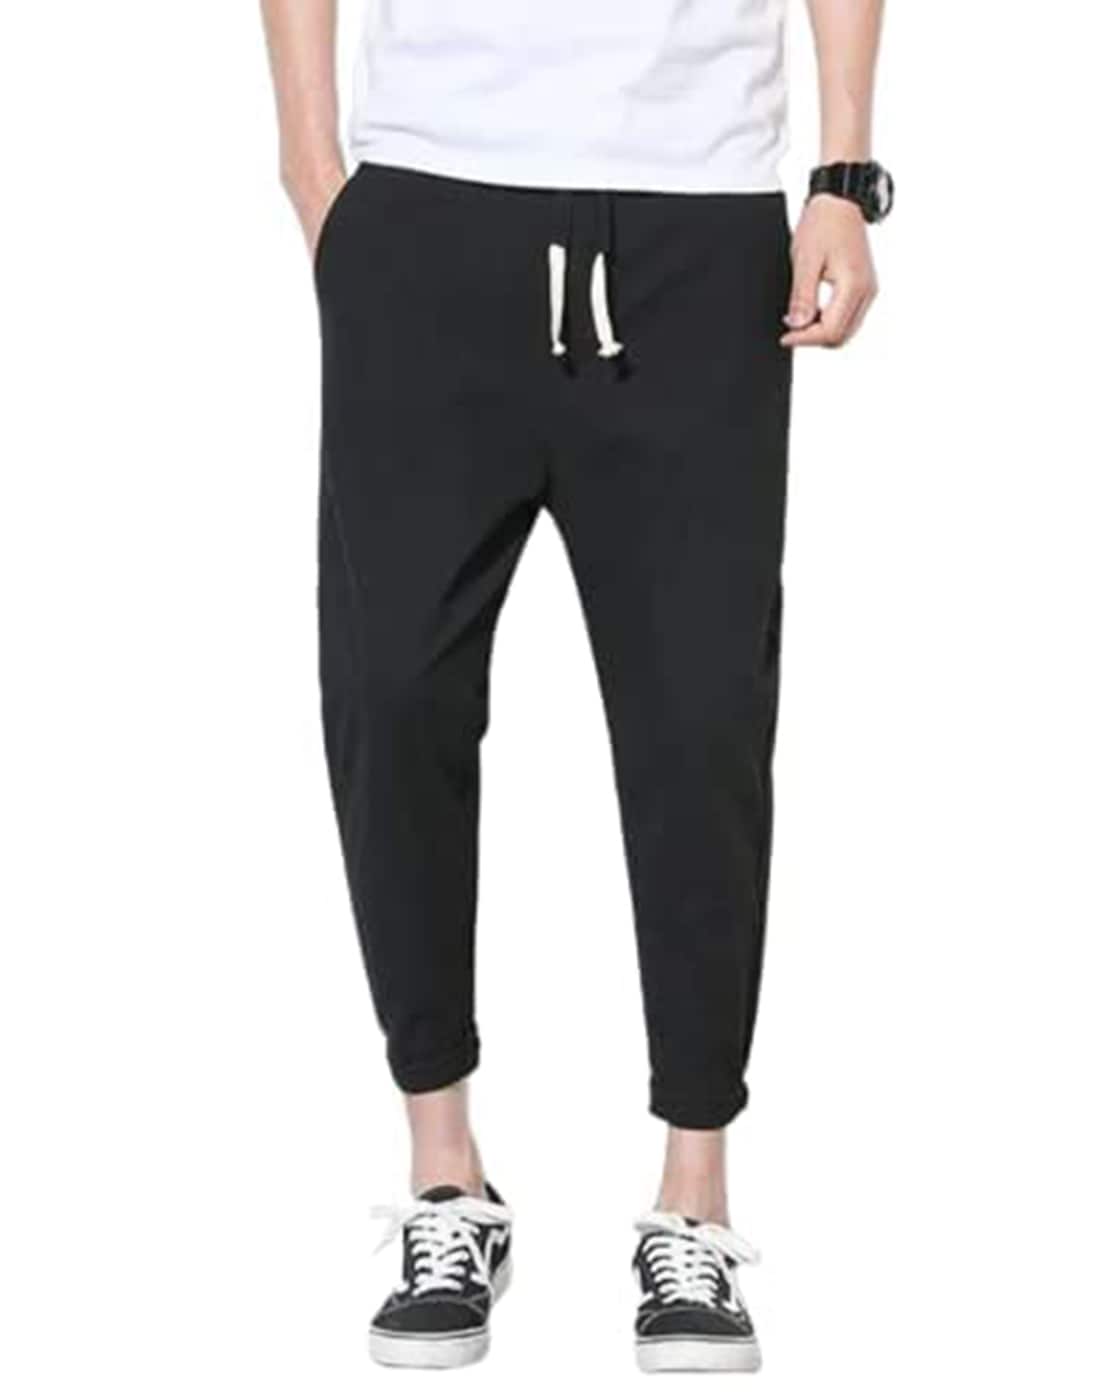 Buy MAIKANONG Mens Slim Joggers Tapered Sweatpants Gym Workout Pants for  Running Athletic Casual, Black, Small at Amazon.in